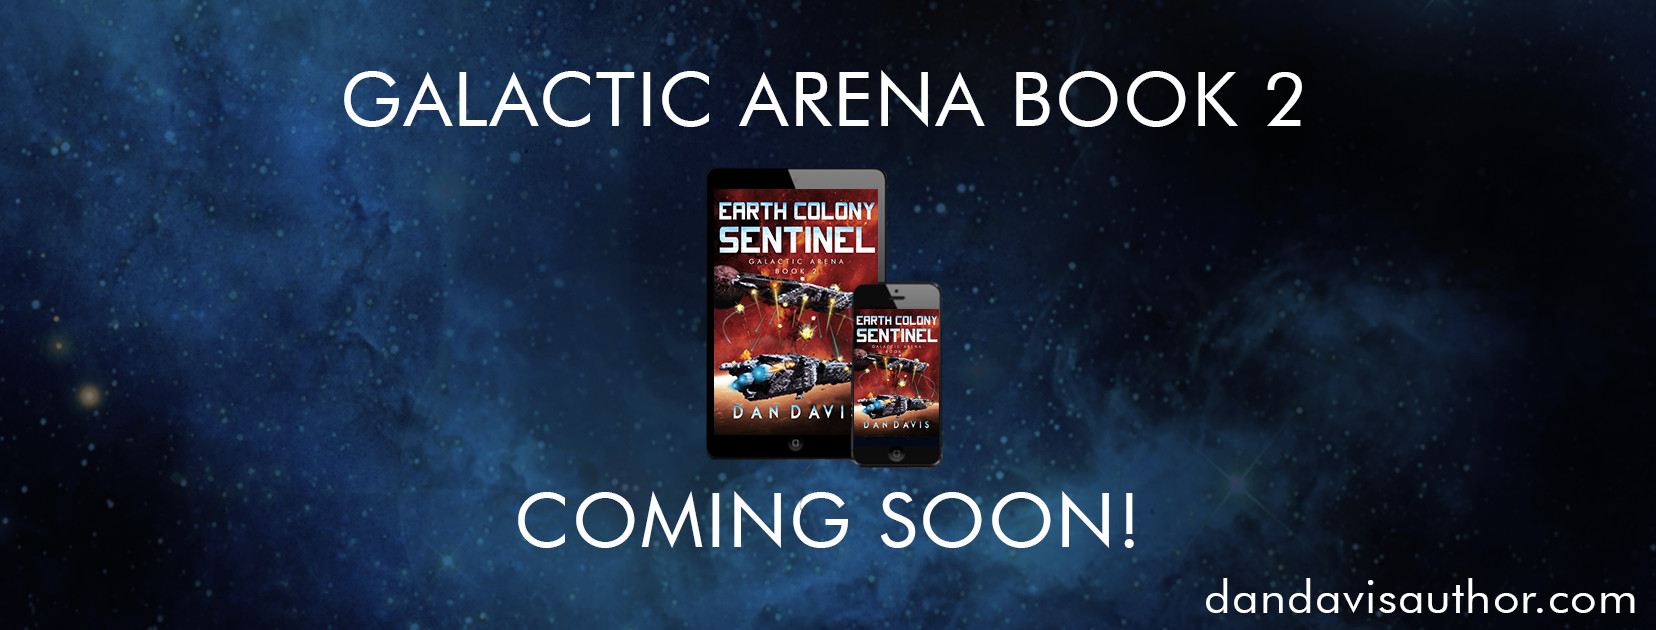 Reviewers Wanted! Galactic Arena Book 2 – thrilling #scifi action